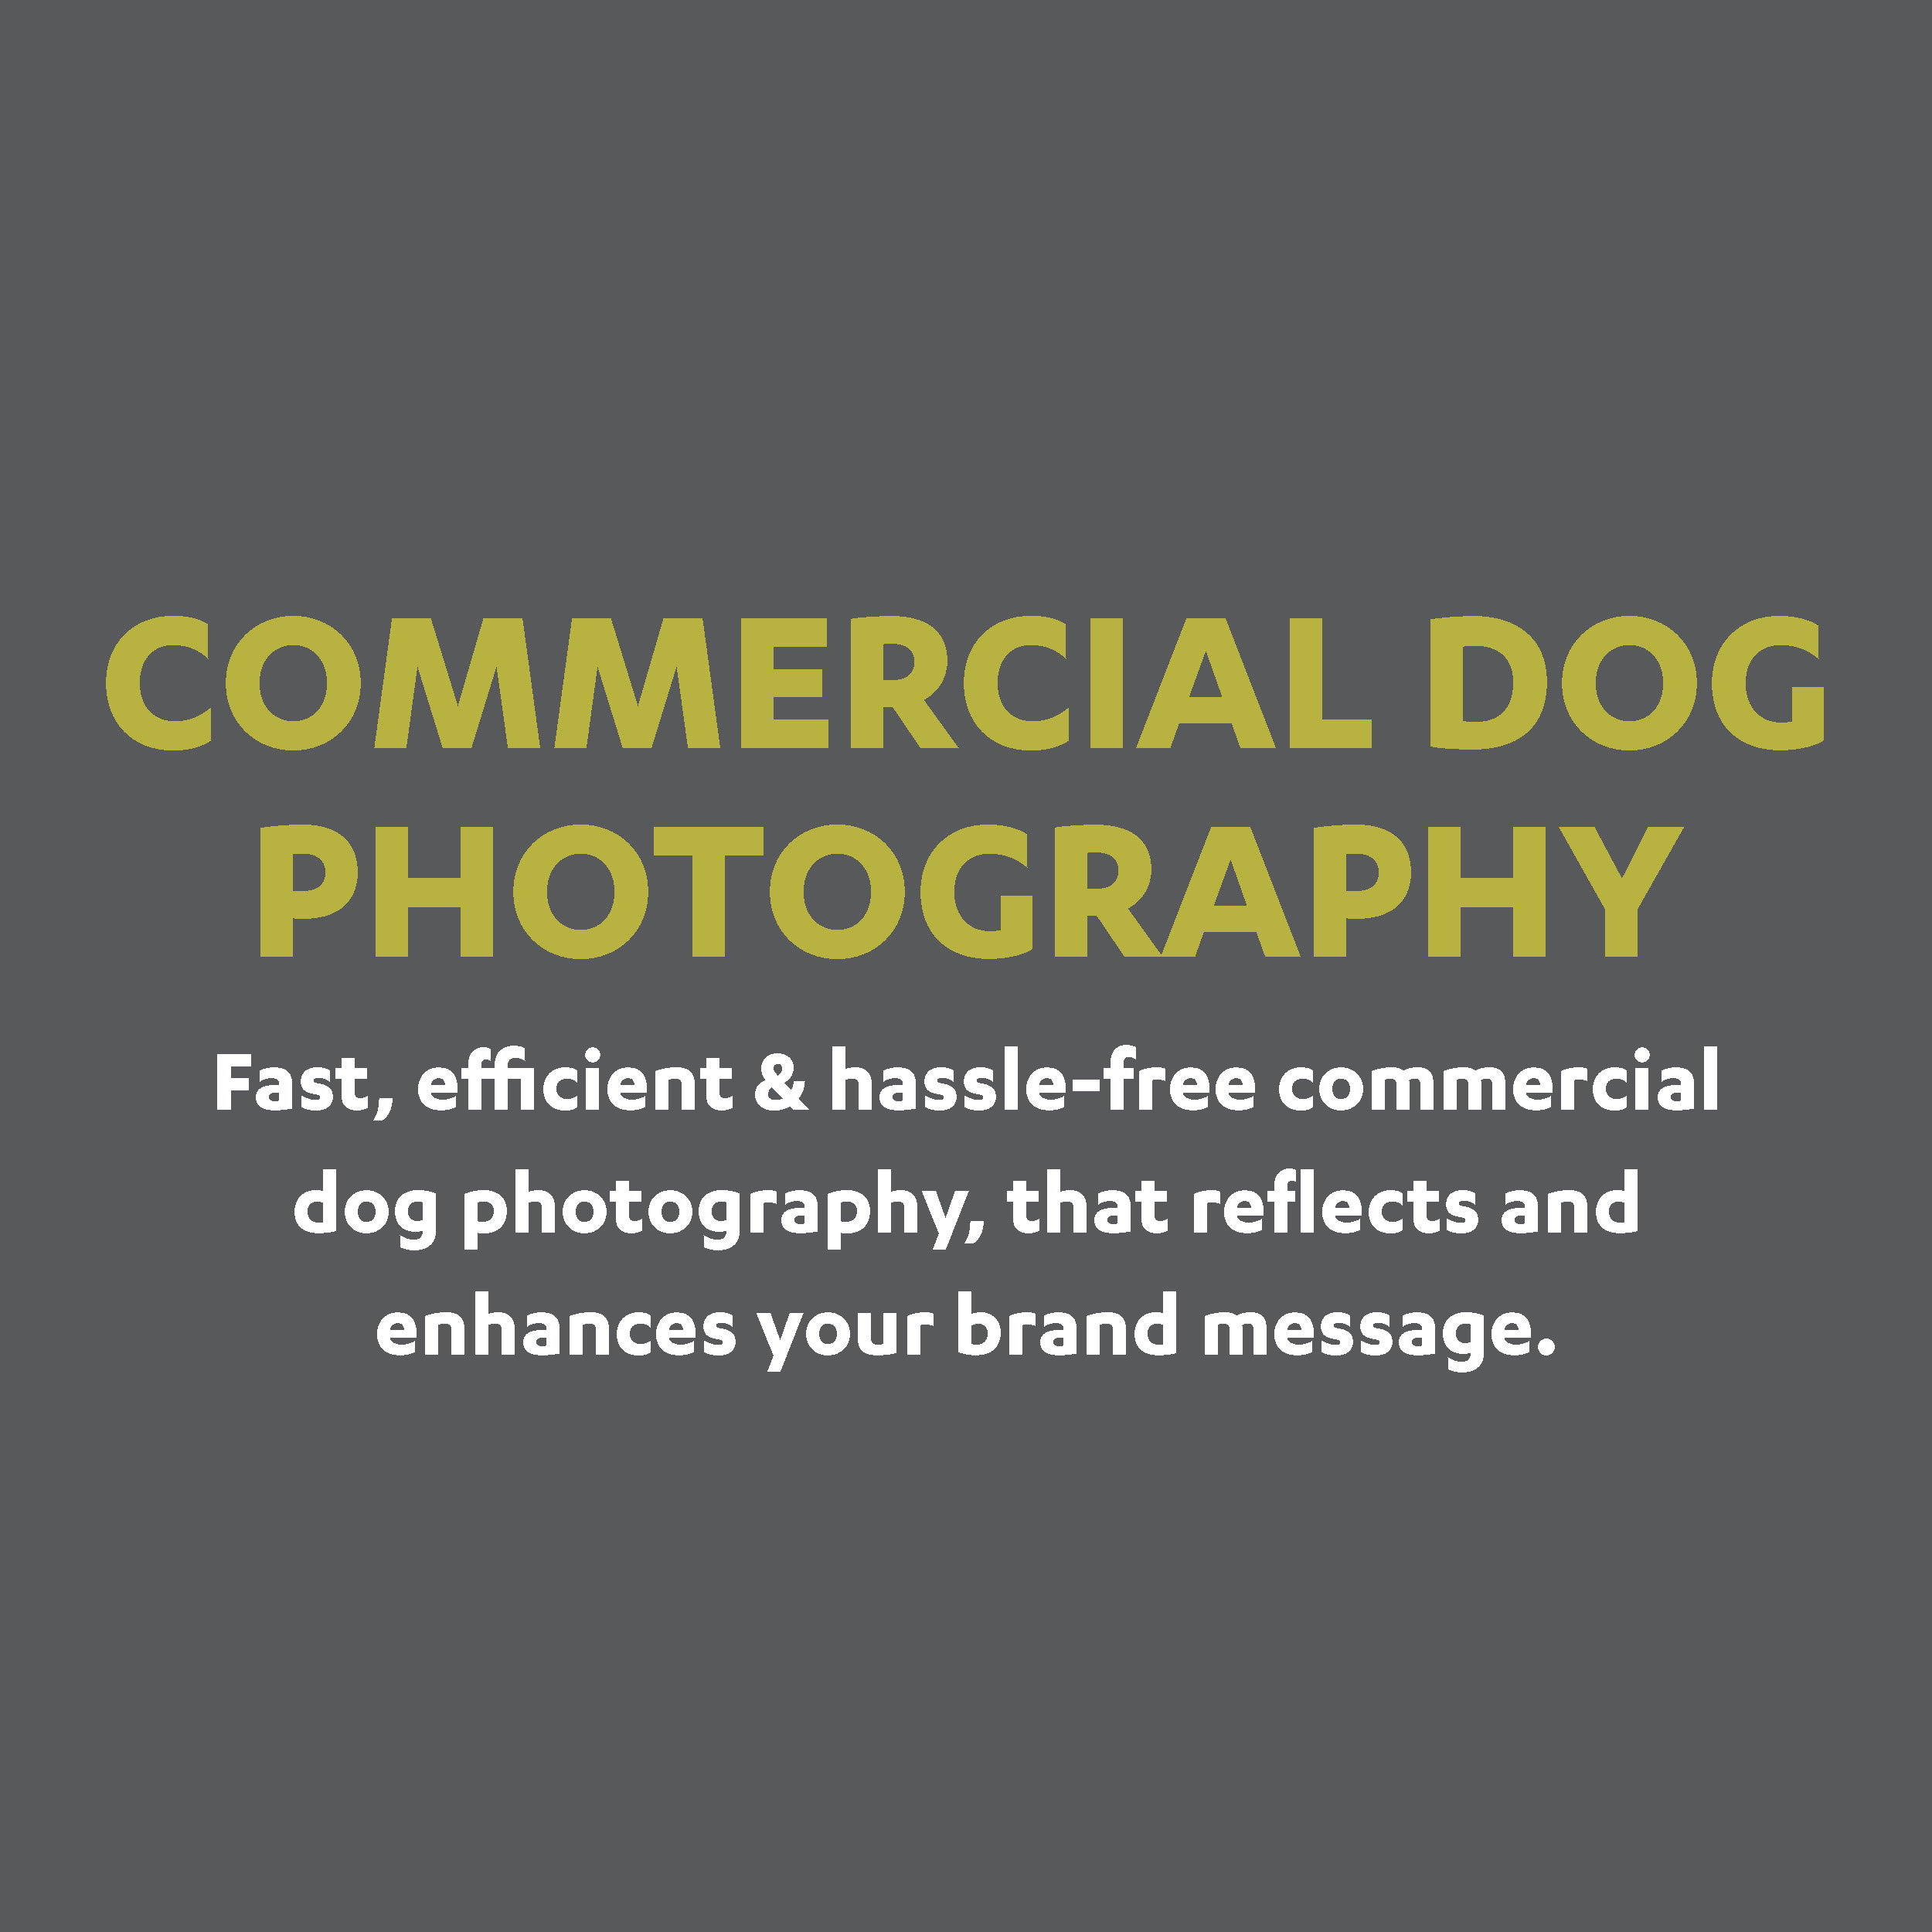 Commercial dog photography and stock images